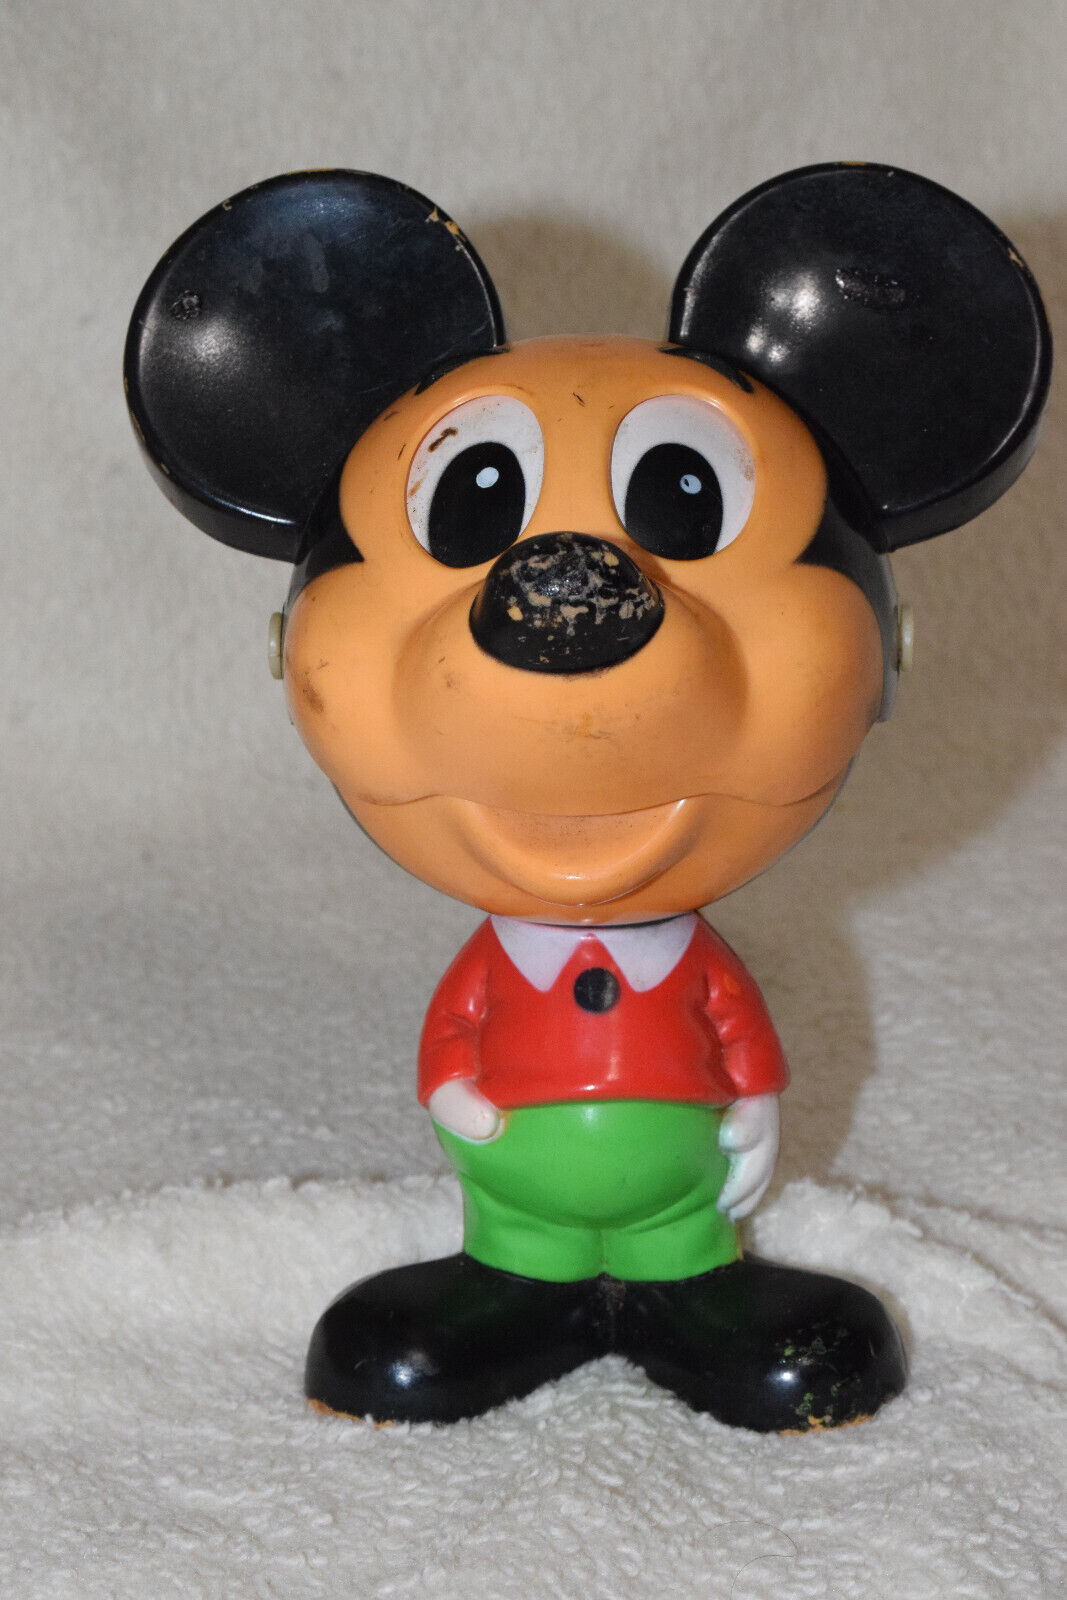 Vintage 1976 Mattel Pull String Talking Mickey Mouse Doll Toy as found see pics